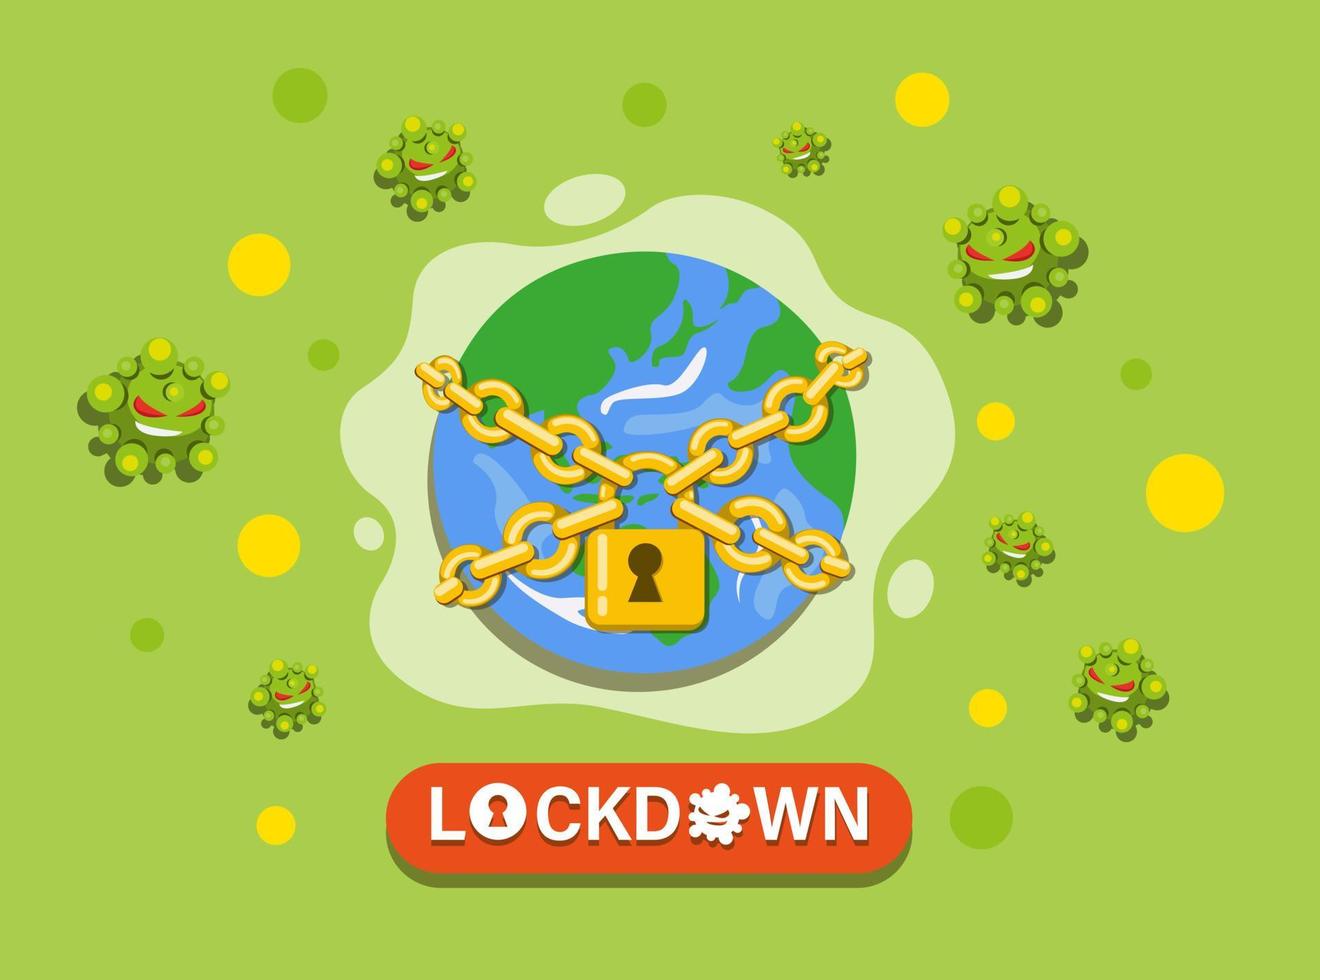 earth globe with locked chain, locklockdown world to protection from virus pandemic cartoon flat illustration vector